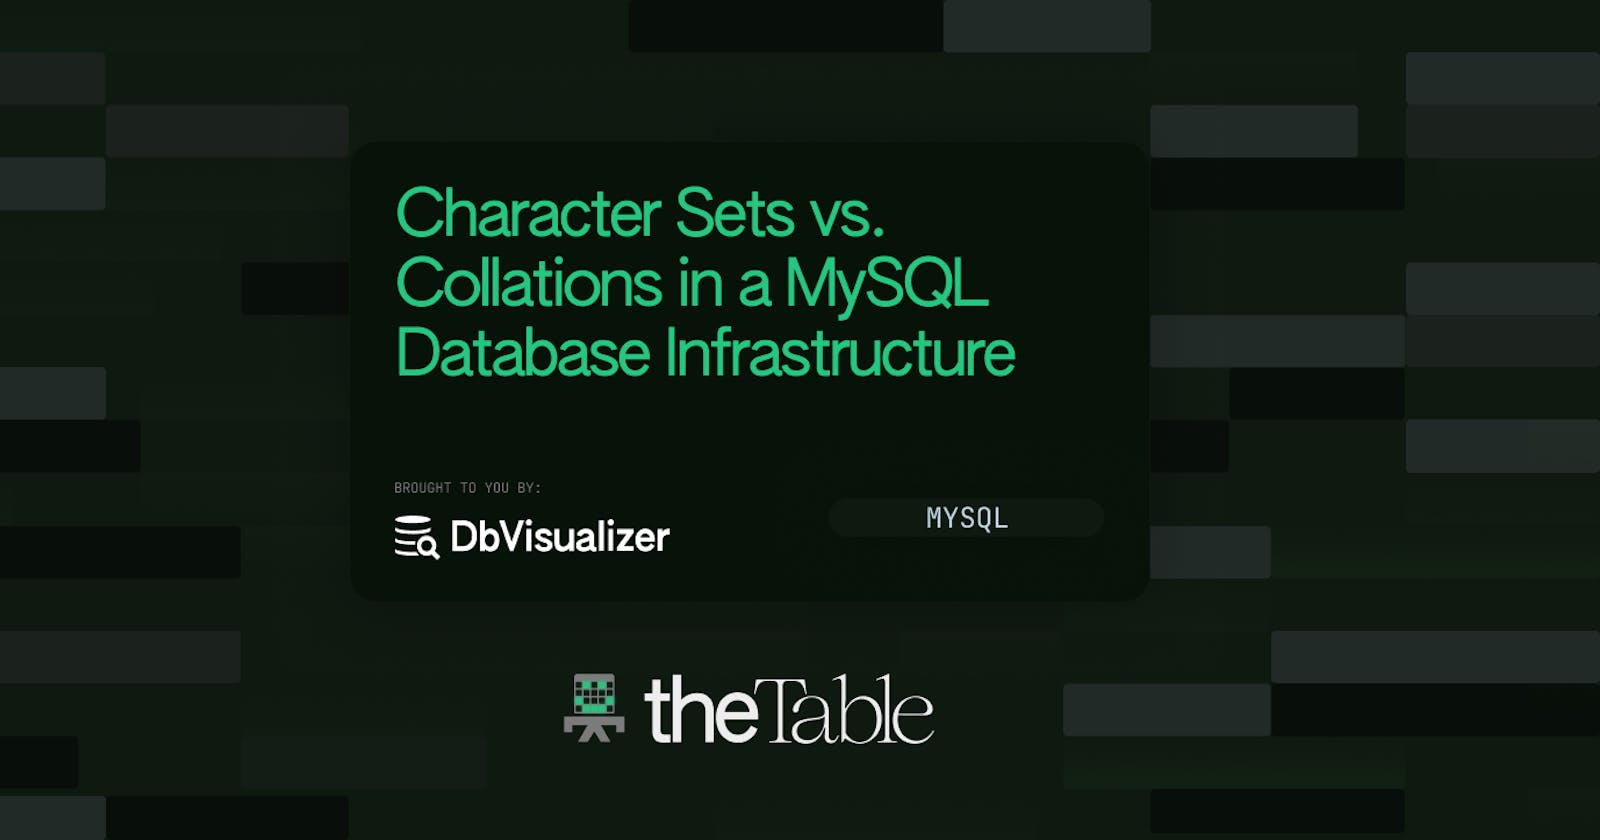 Character Sets vs. Collations in a MySQL Database Infrastructure